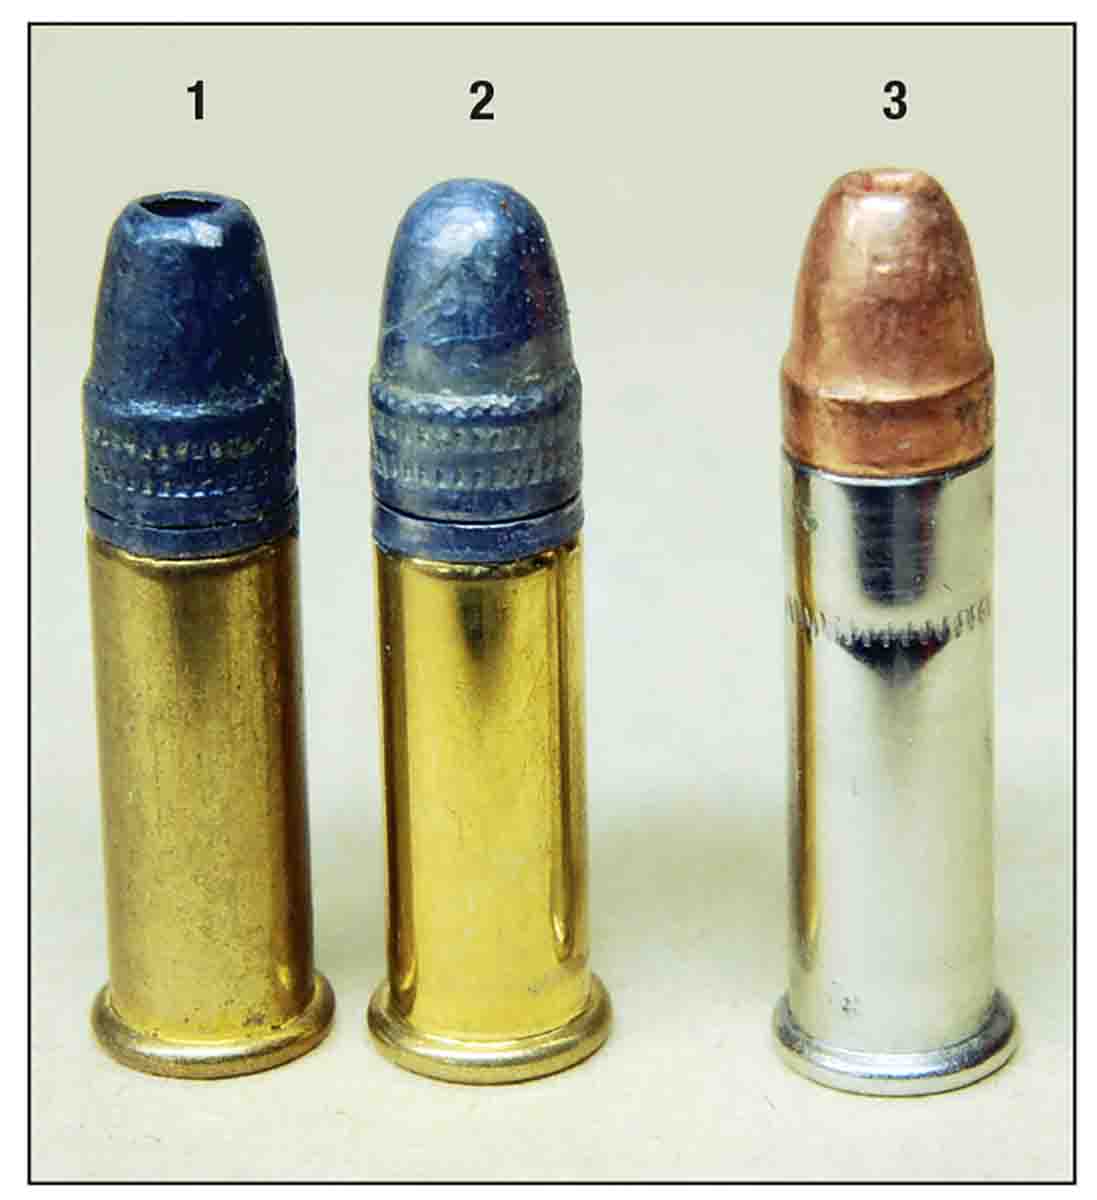 Long Rifle cartridges (1 and 2) having a normal .613-inch case, will fit in the match chamber. Long-cased CCI Stinger cartridges (3) will not.